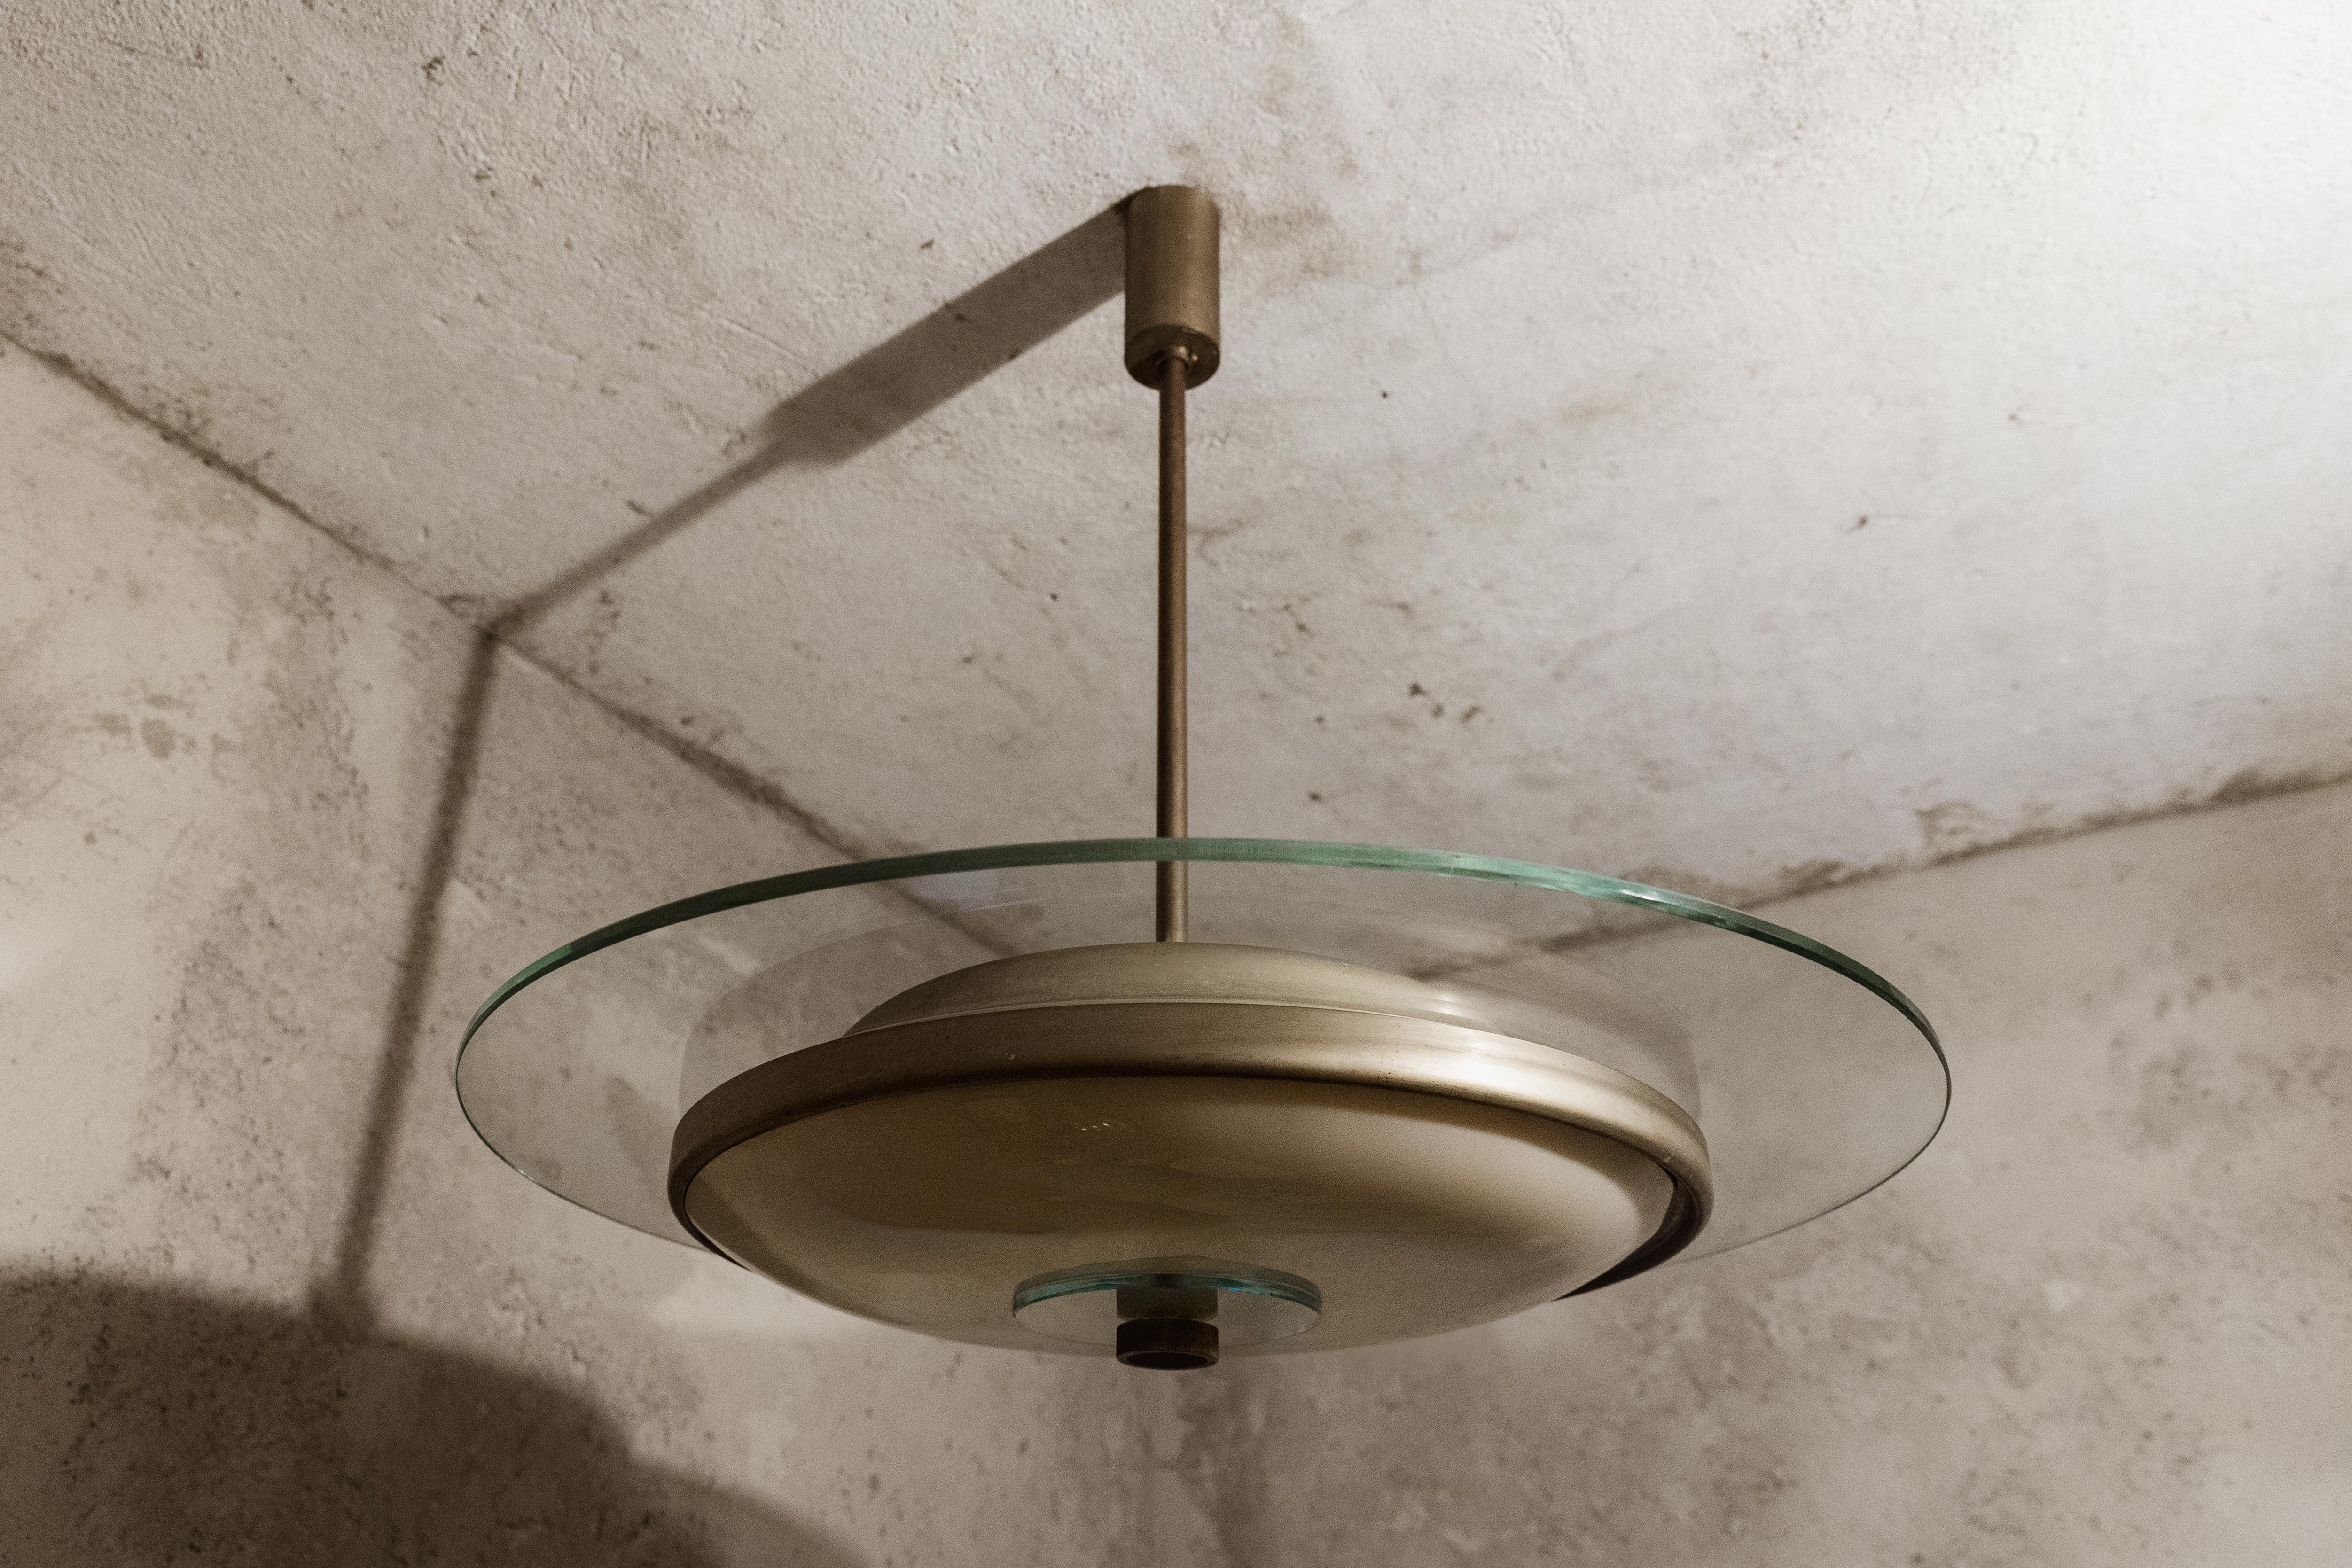 Gio Ponti “Padelle” ceiling light for Fontana Arte, brass and glass, Italy, 1933.

This suspension lamp, manufactured by Fontana Arte, features a transparent glass disc and a brass one, while a chrome-plated brass frame supports the structure. This